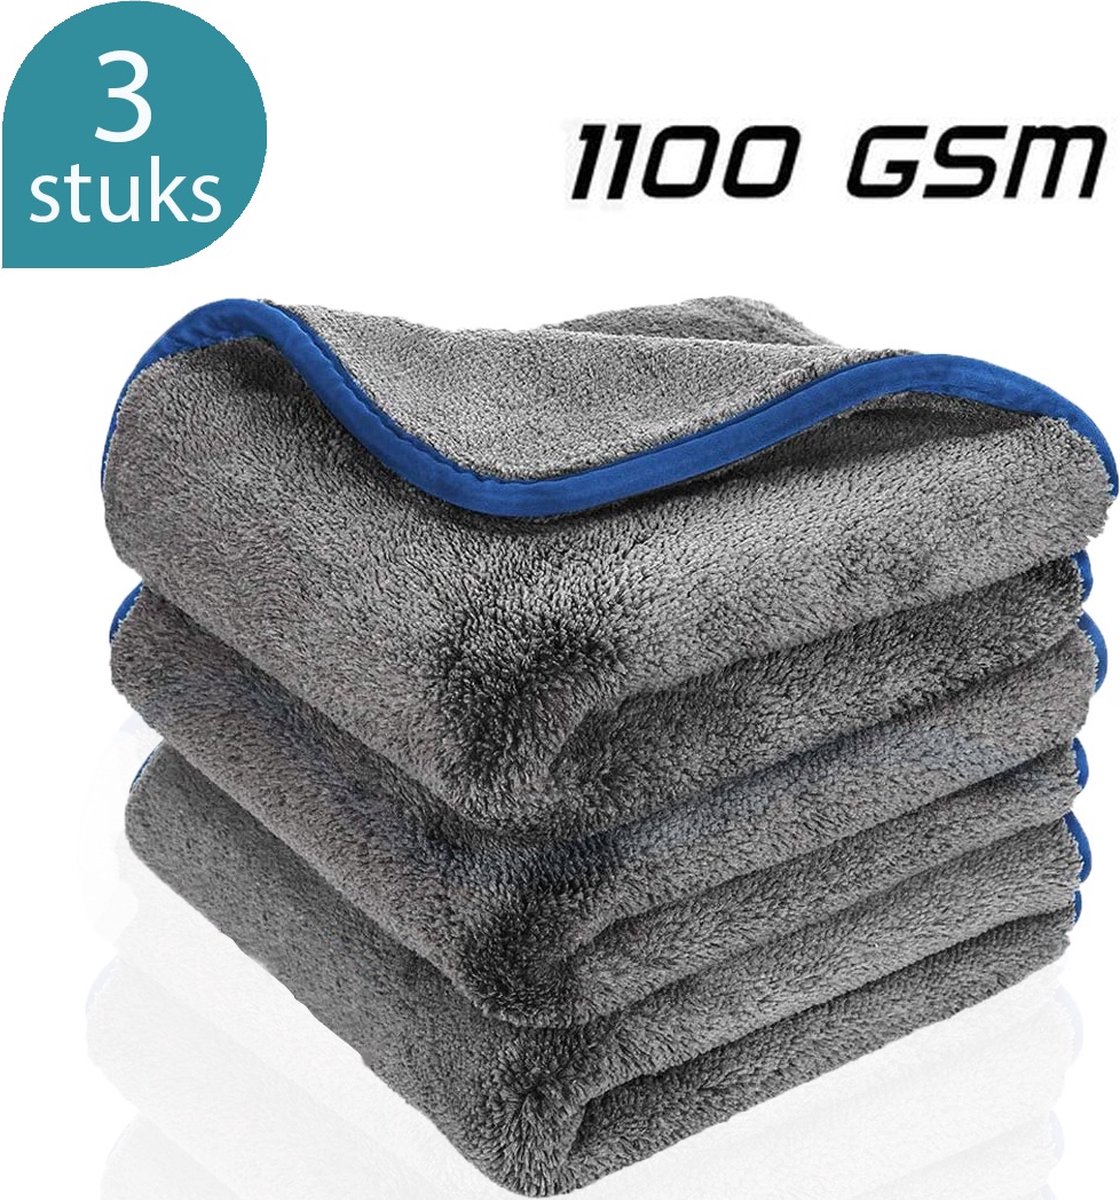 Chiffons en microfibre ForDig 1100 GSM (3 pièces) - Anti-rayures - Super  absorbant 